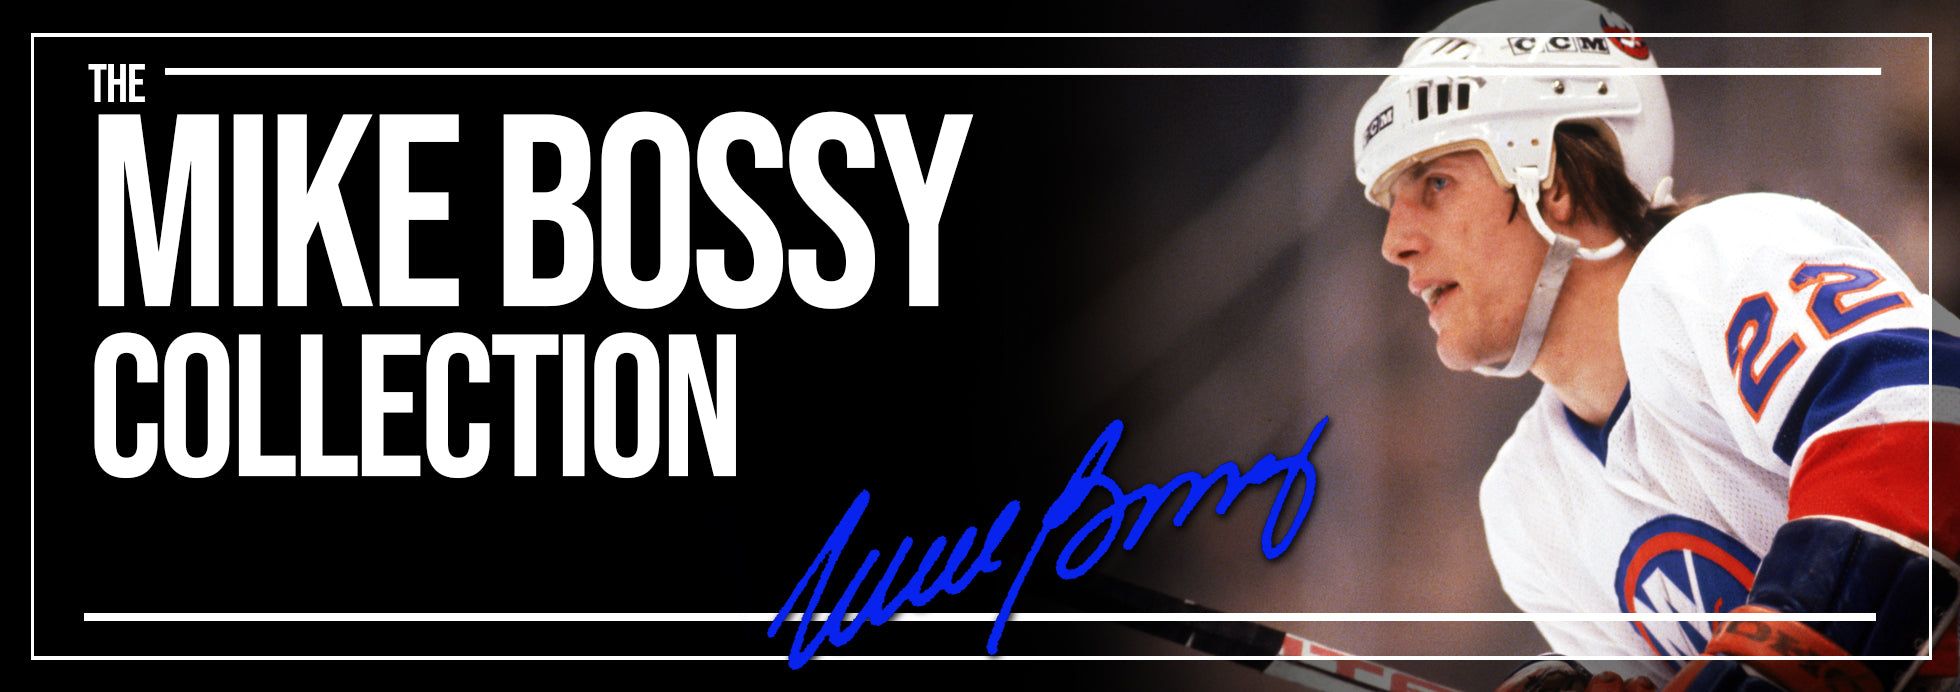 Mike Bossy Collection Banner